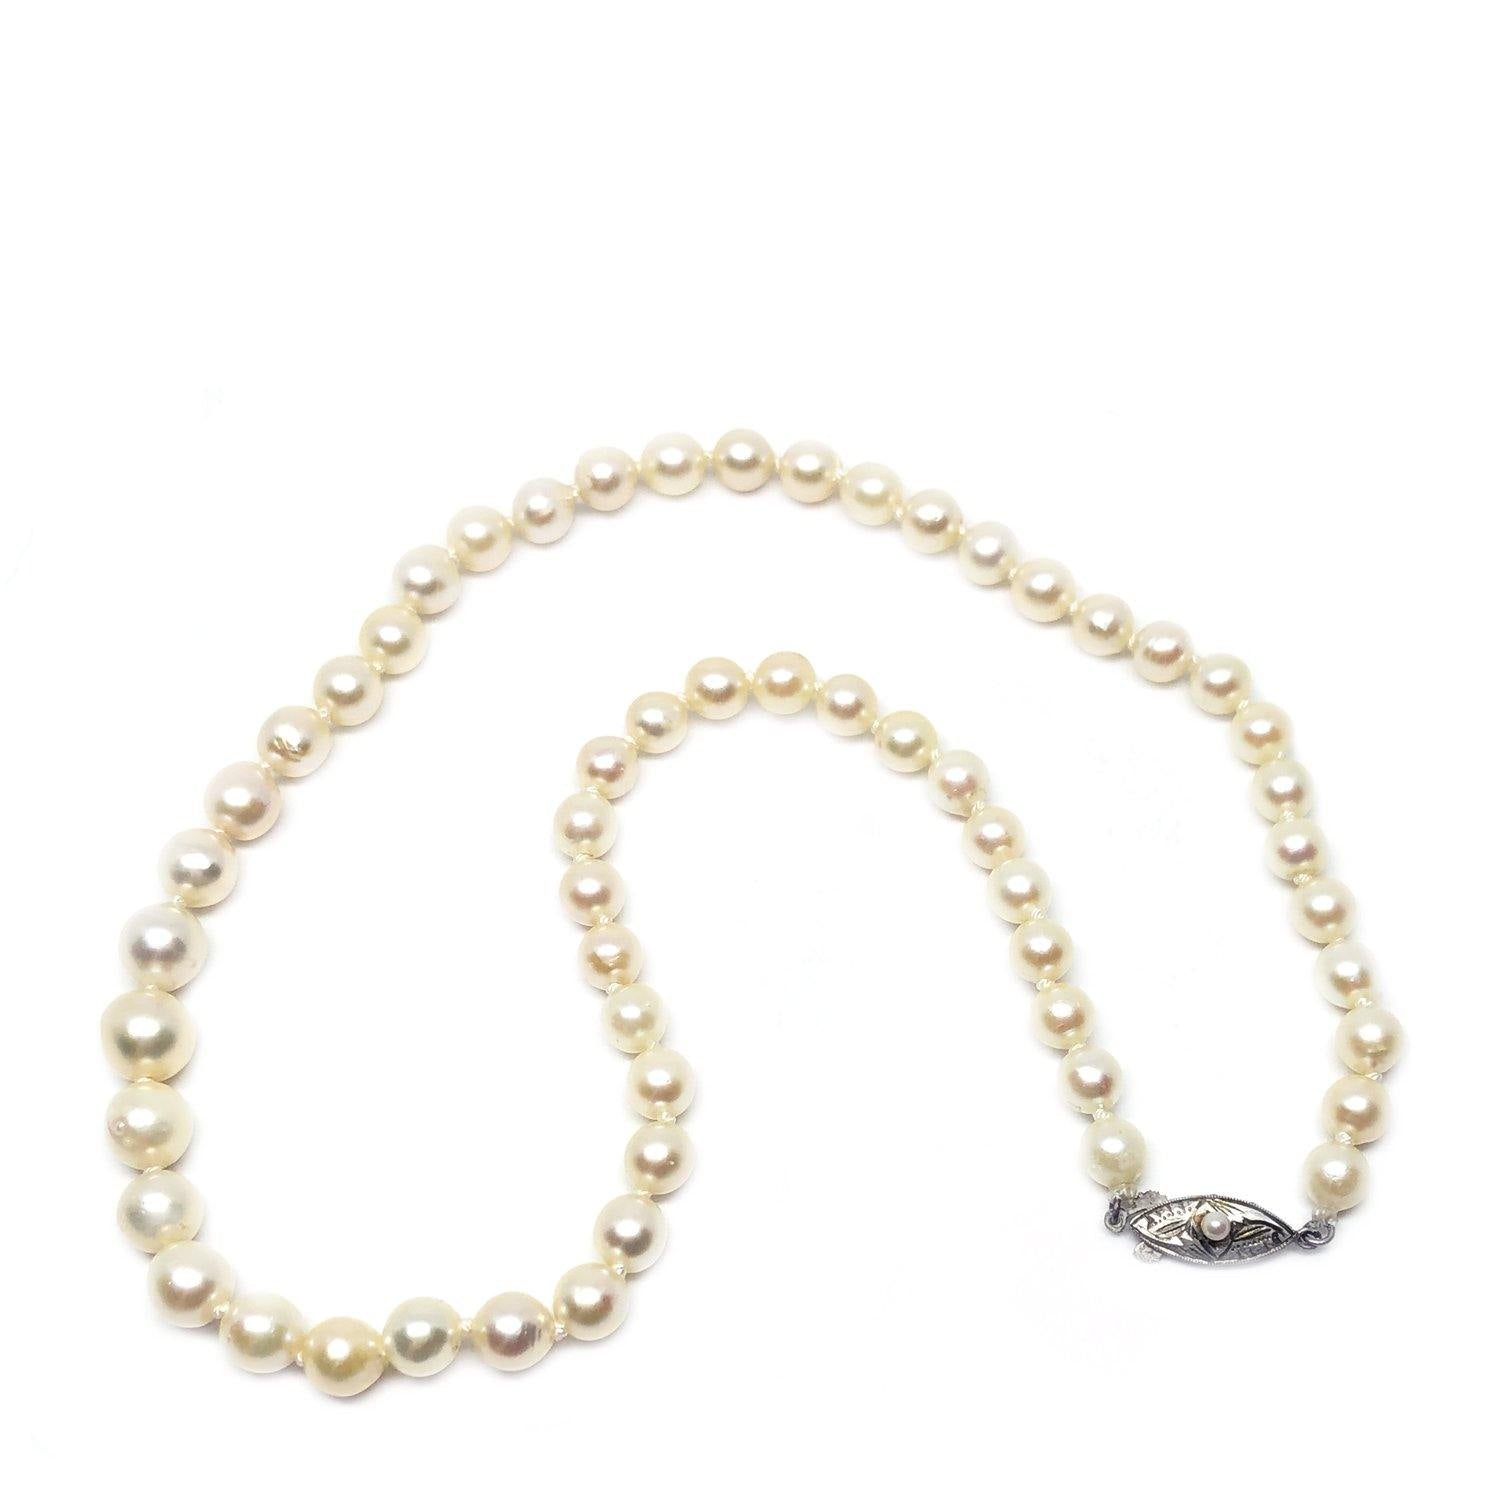 Art Deco Japanese Saltwater Cultured Akoya Pearl Baroque Graduated Necklace - Sterling Silver 18 Inch